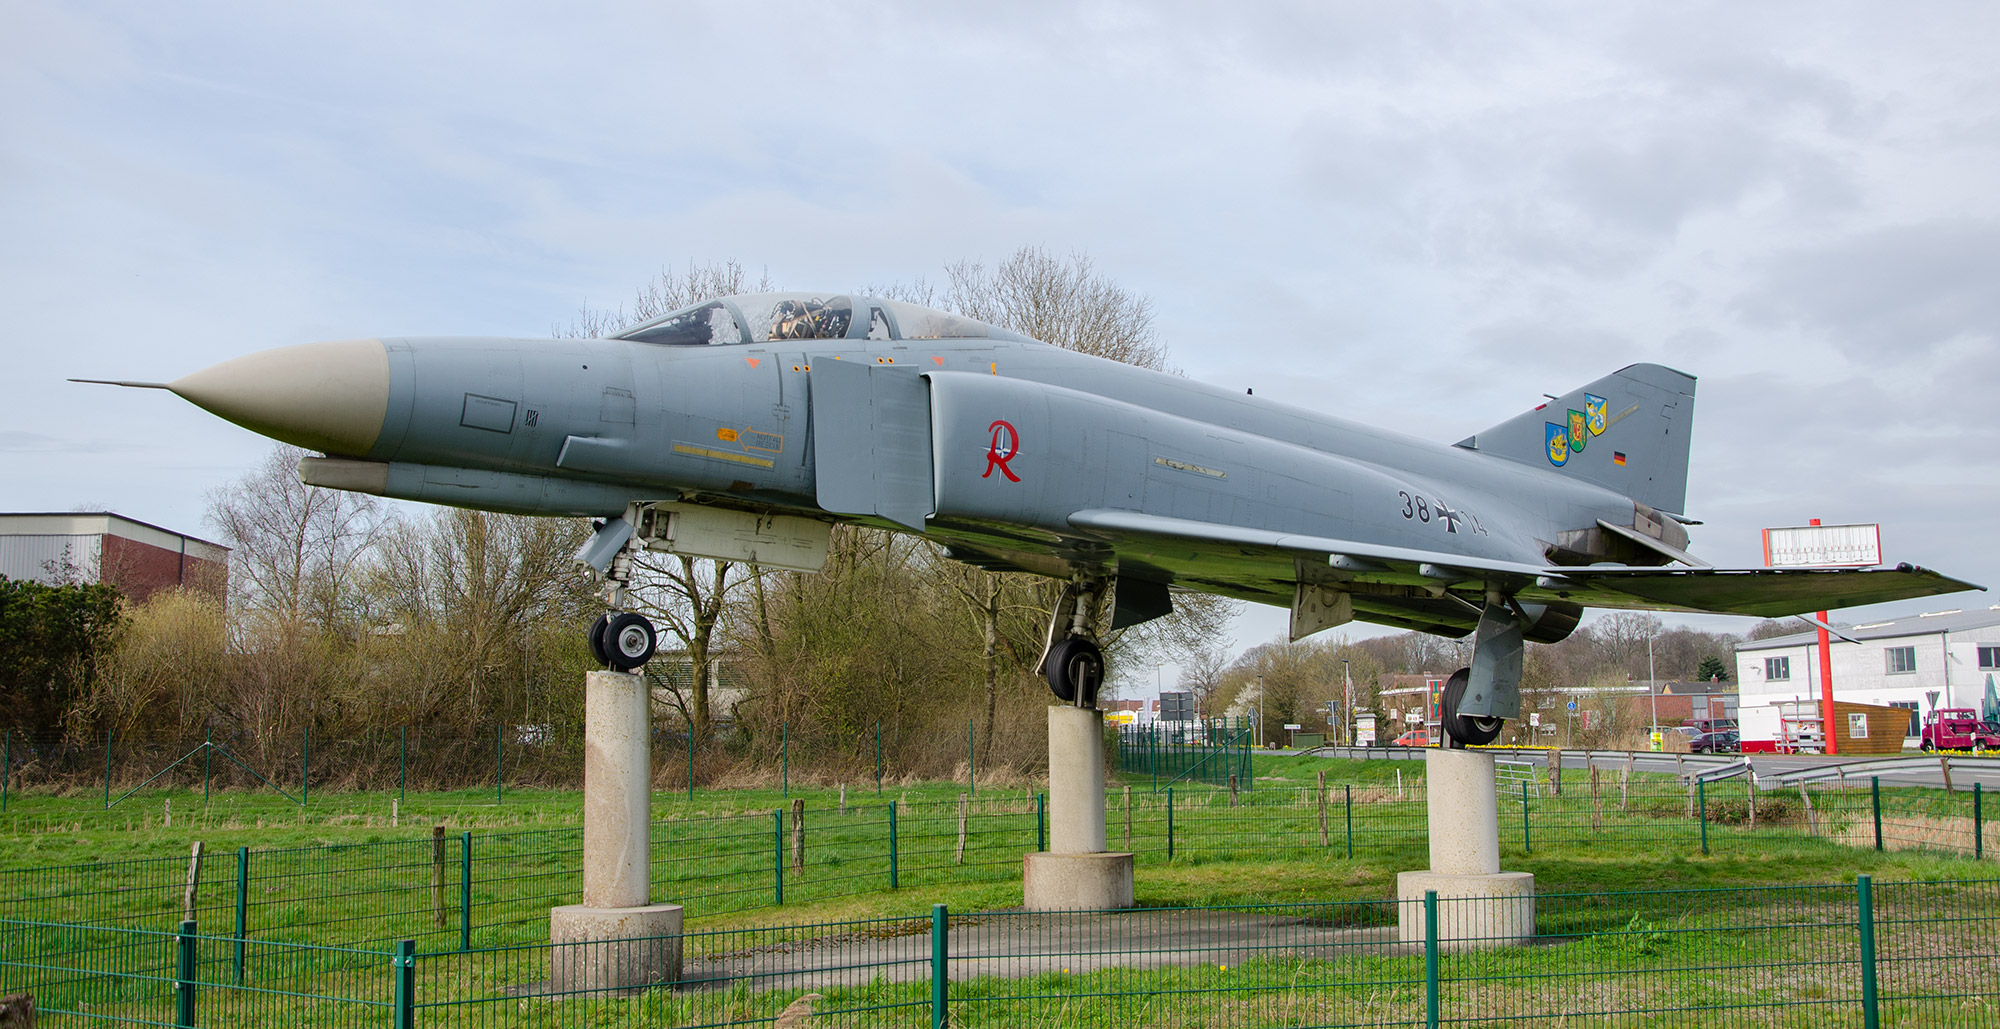 38+14 on display in the Wittmund district